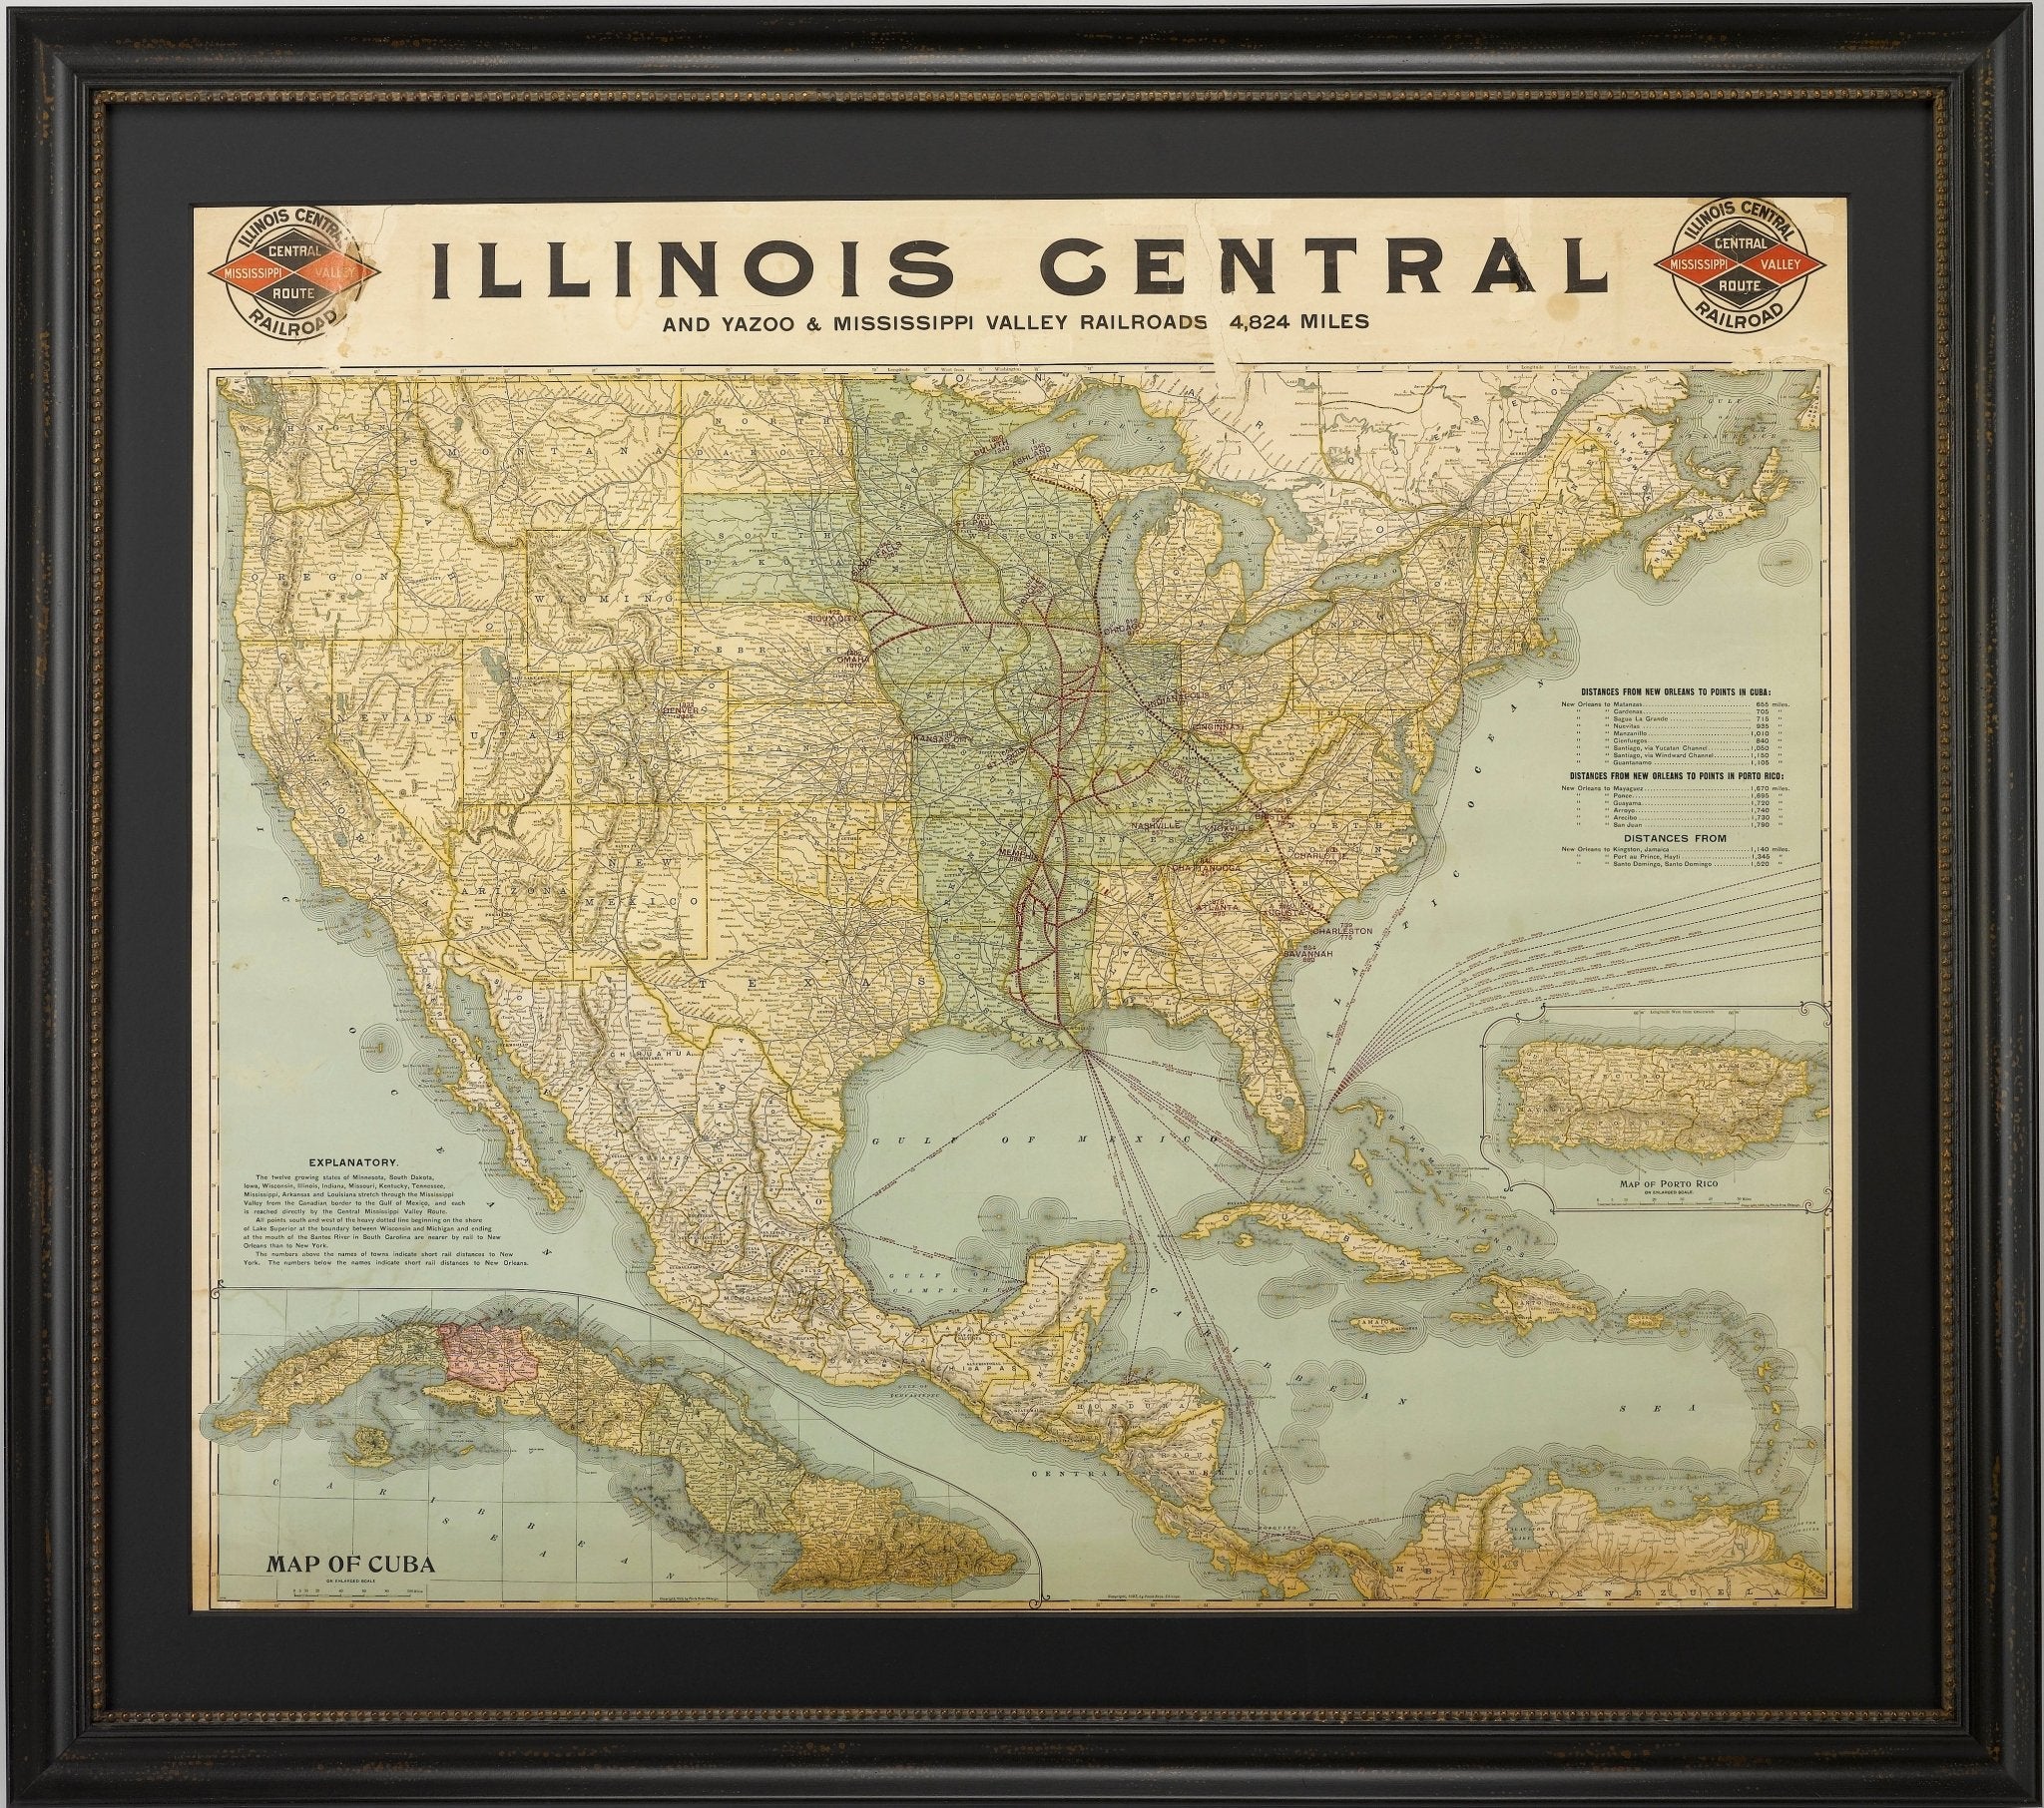 1899 Poole Brothers Railroad Map of the Illinois Central Railroad - The Great Republic